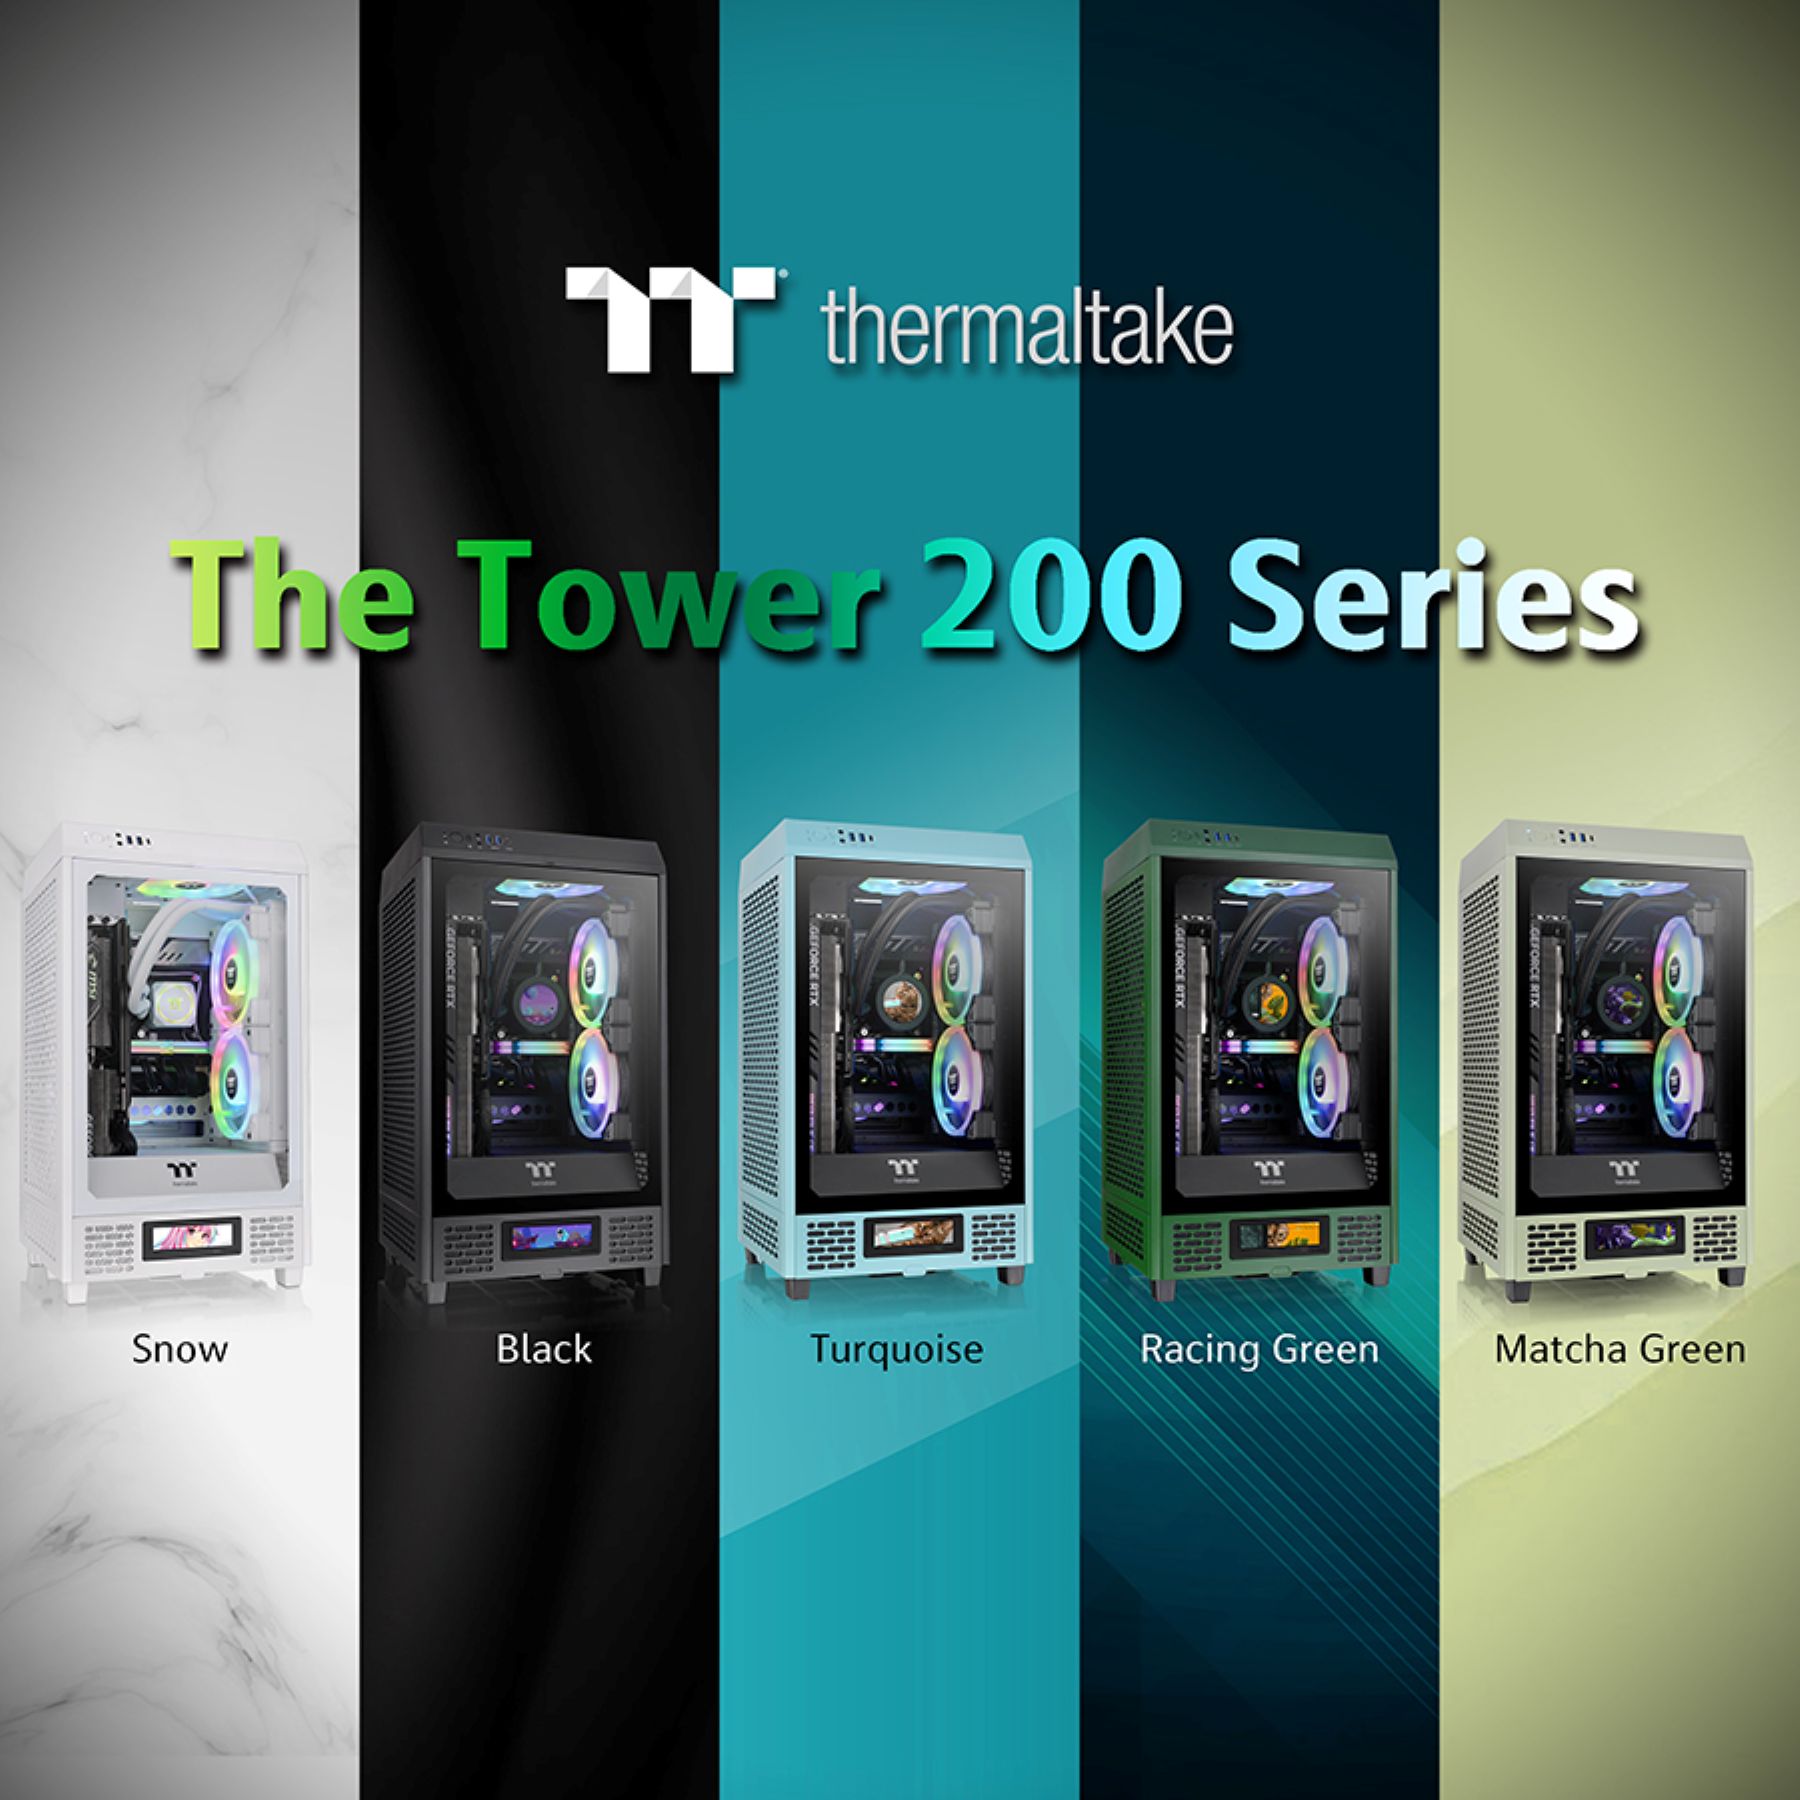 Thermaltake The Tower 200 Mini Chassis Debuts New Green Colors